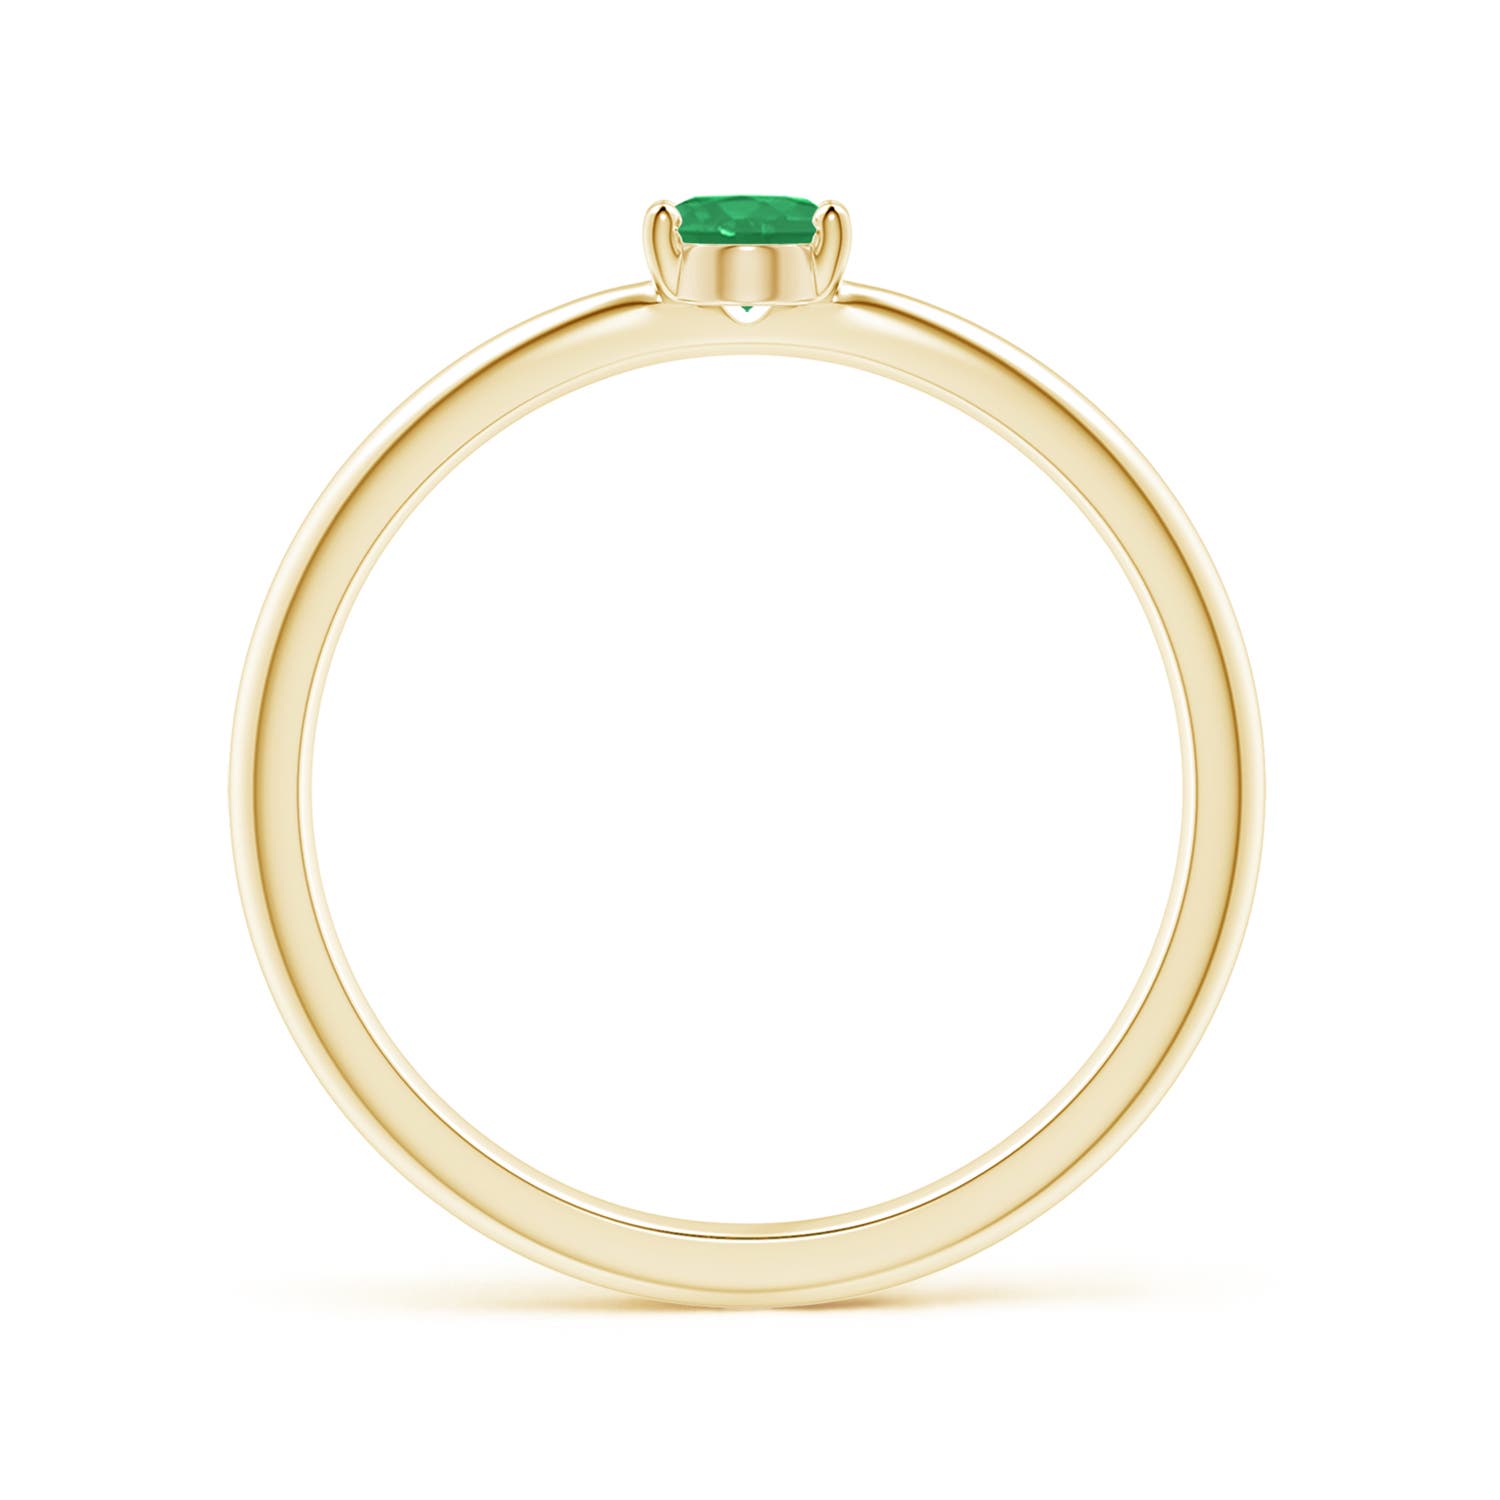 A - Emerald / 0.3 CT / 14 KT Yellow Gold